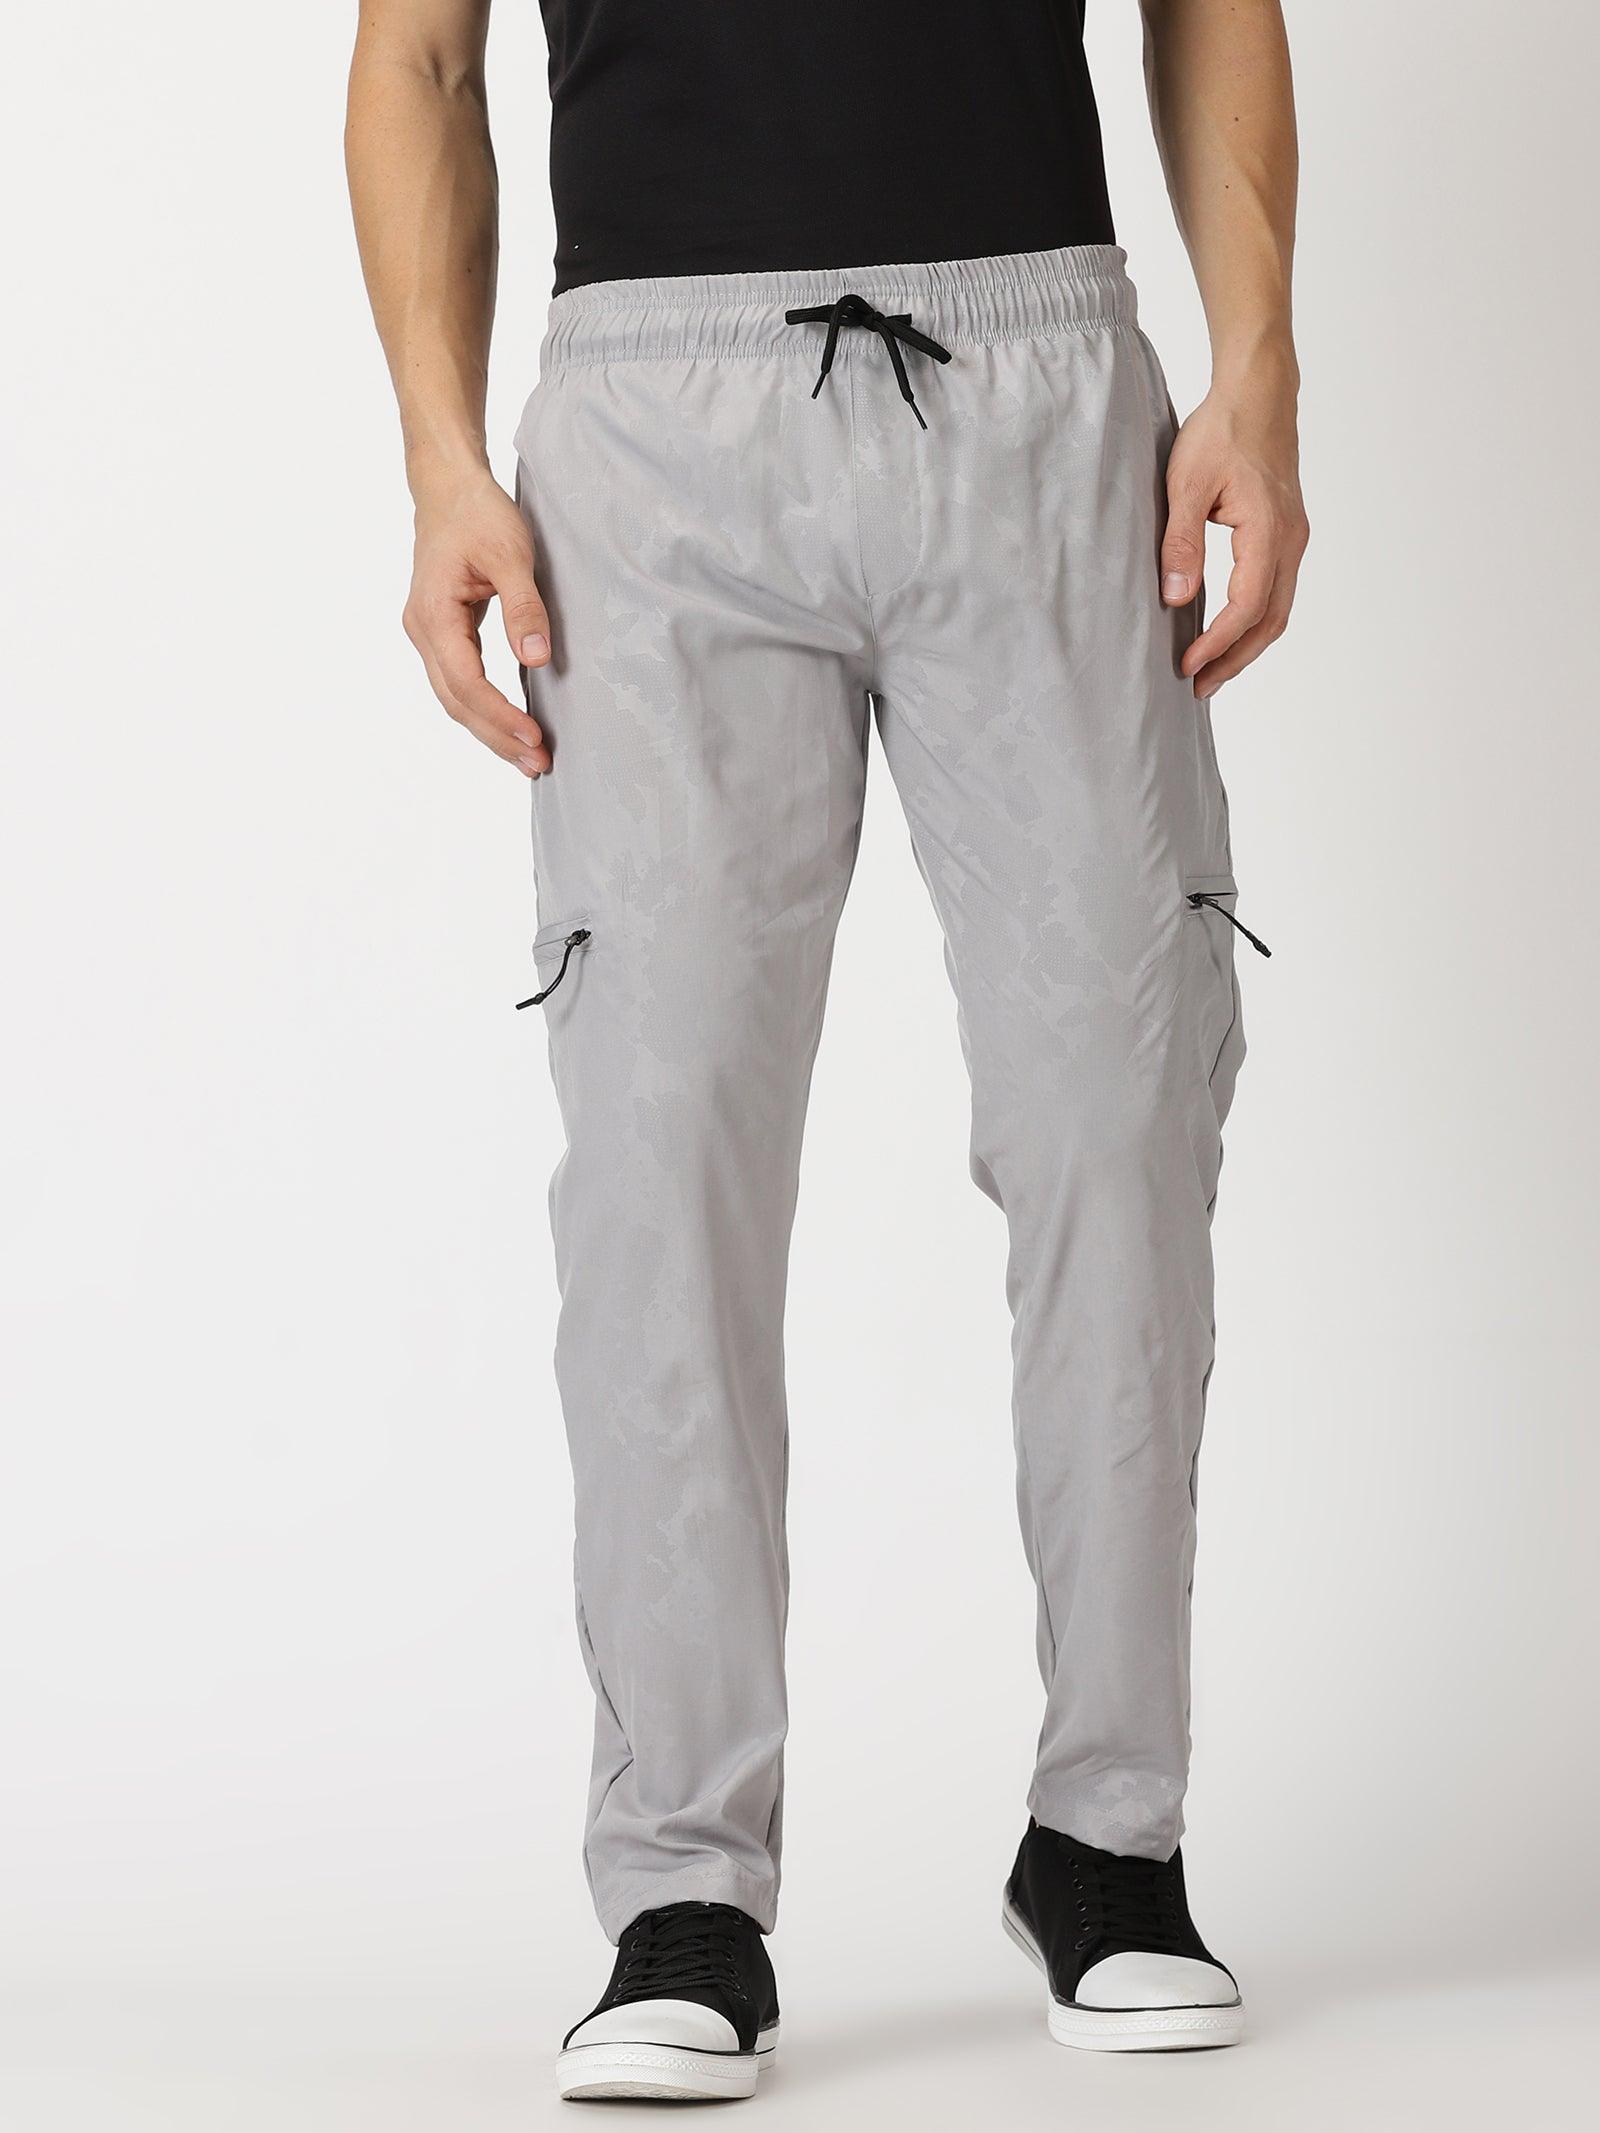 What are jogger pants? - Quora